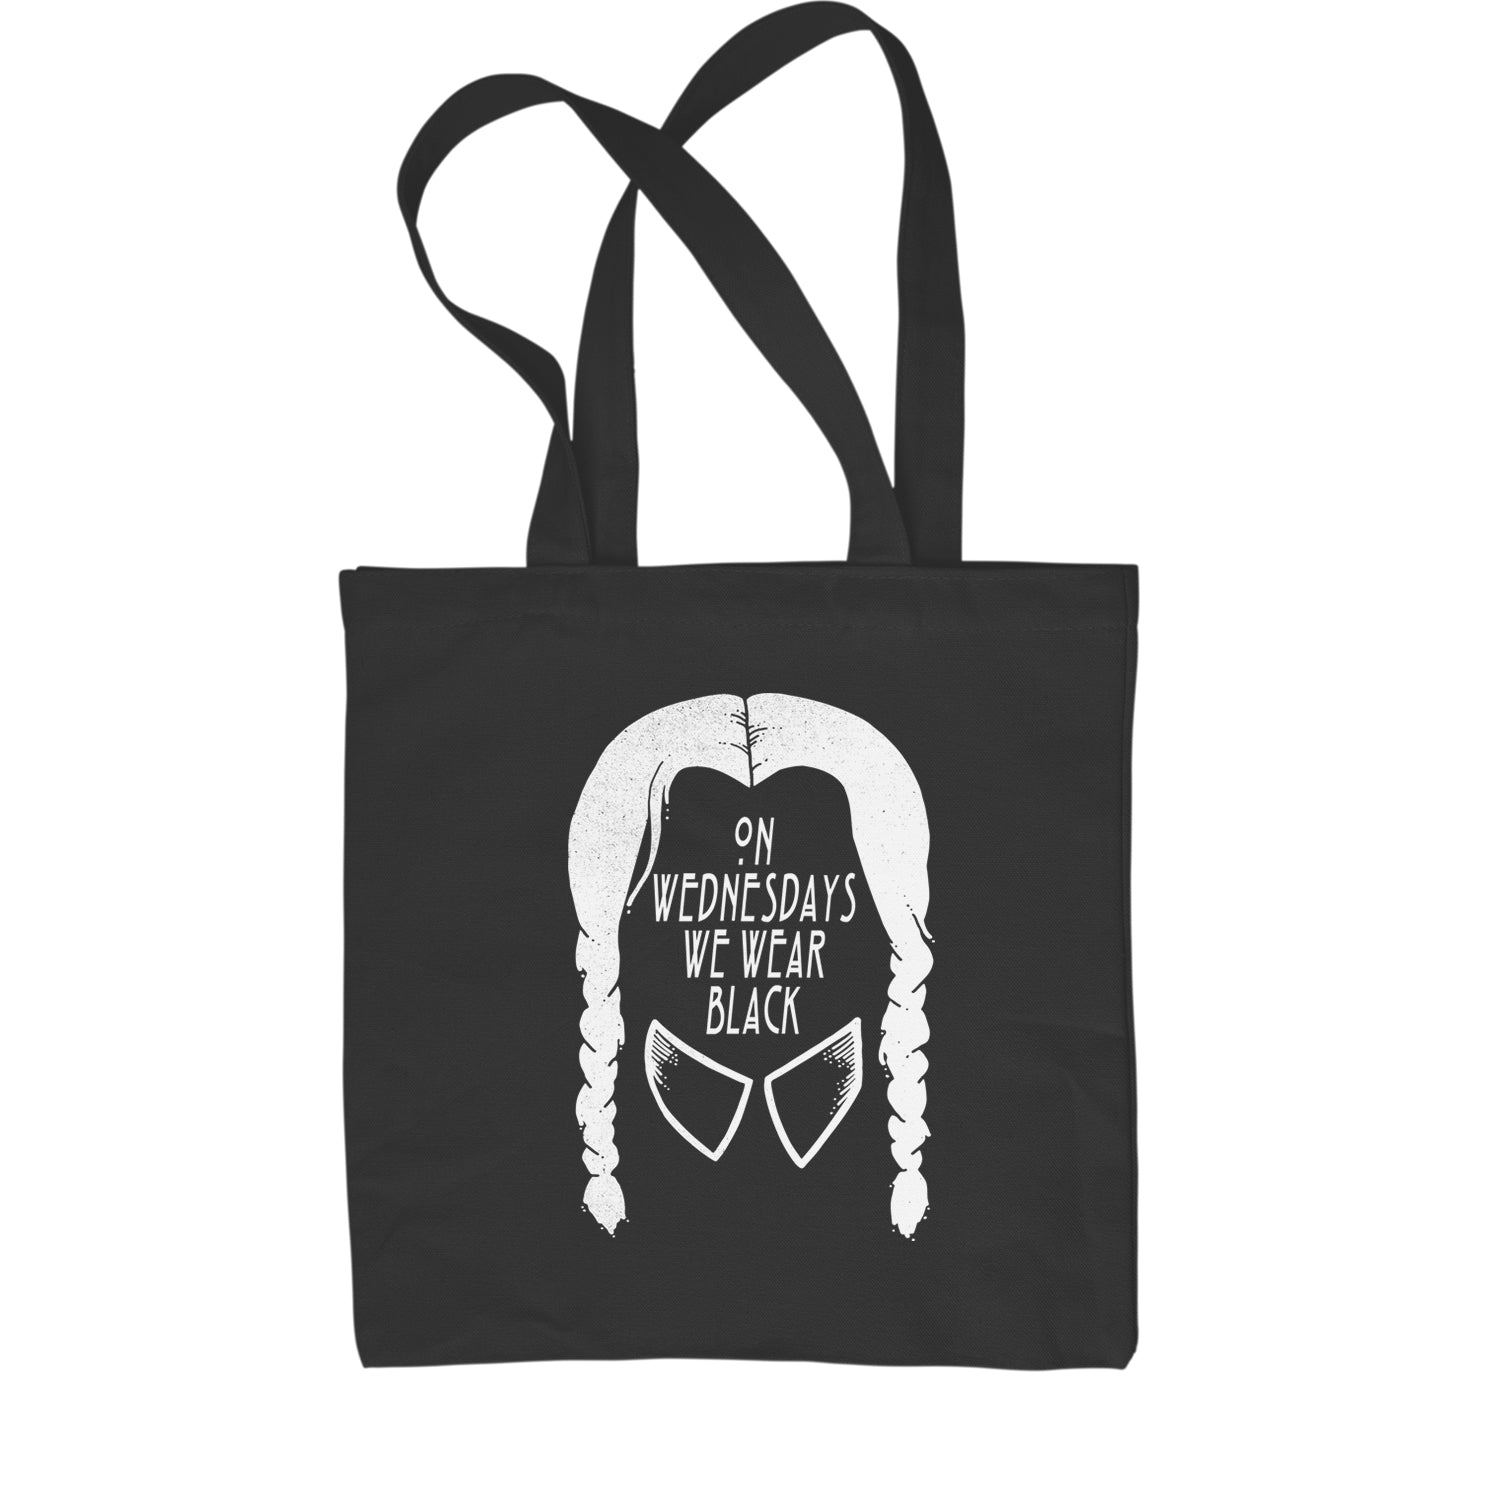 On Wednesdays, We Wear Black Shopping Tote Bag addams, family, gomez, morticia, pugsly, ricci, Wednesday by Expression Tees